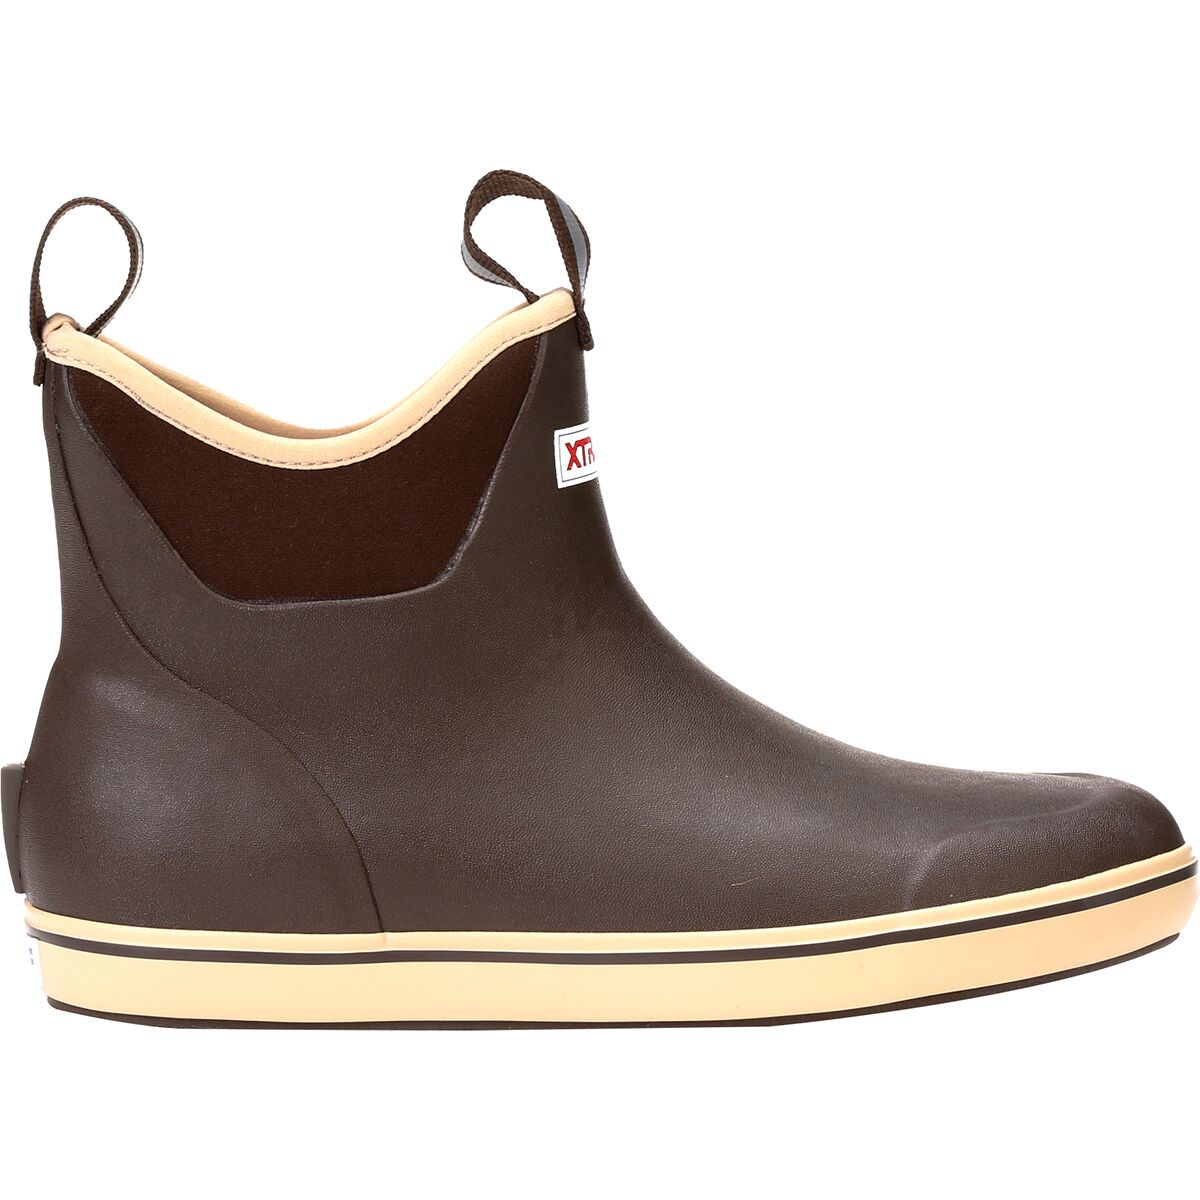 Ankle 6in Deck Boot - Men